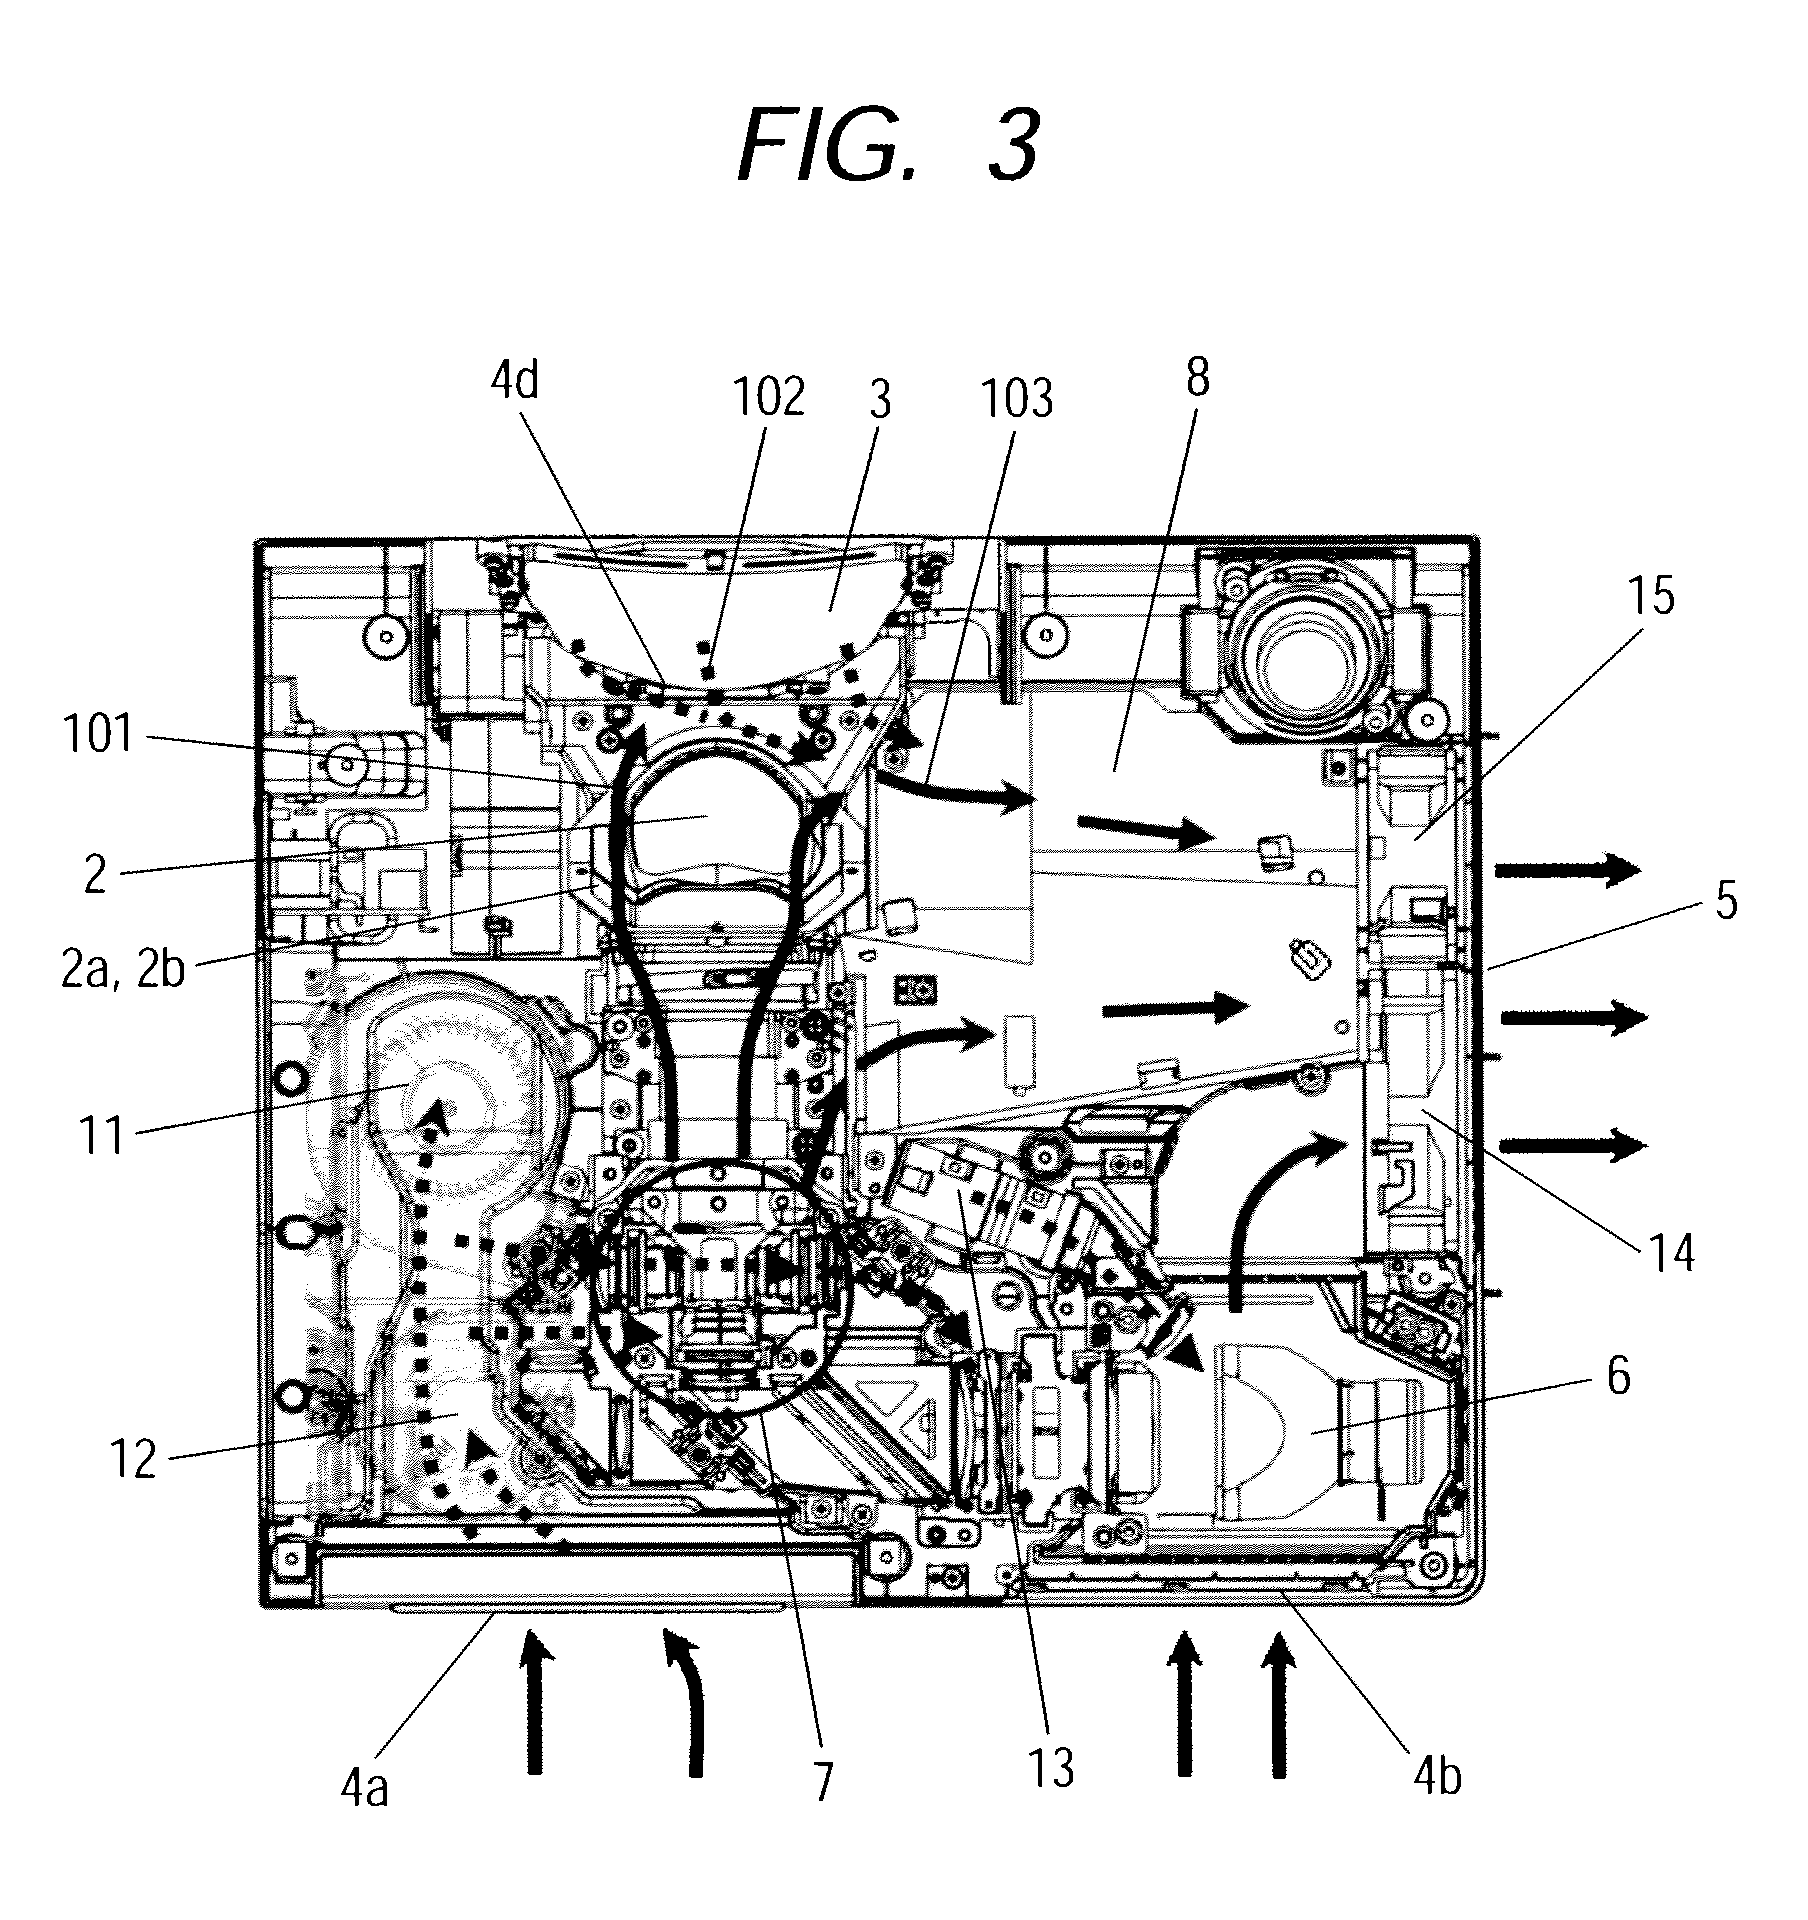 Projection image displaying device with openings around its projection lens and mirror